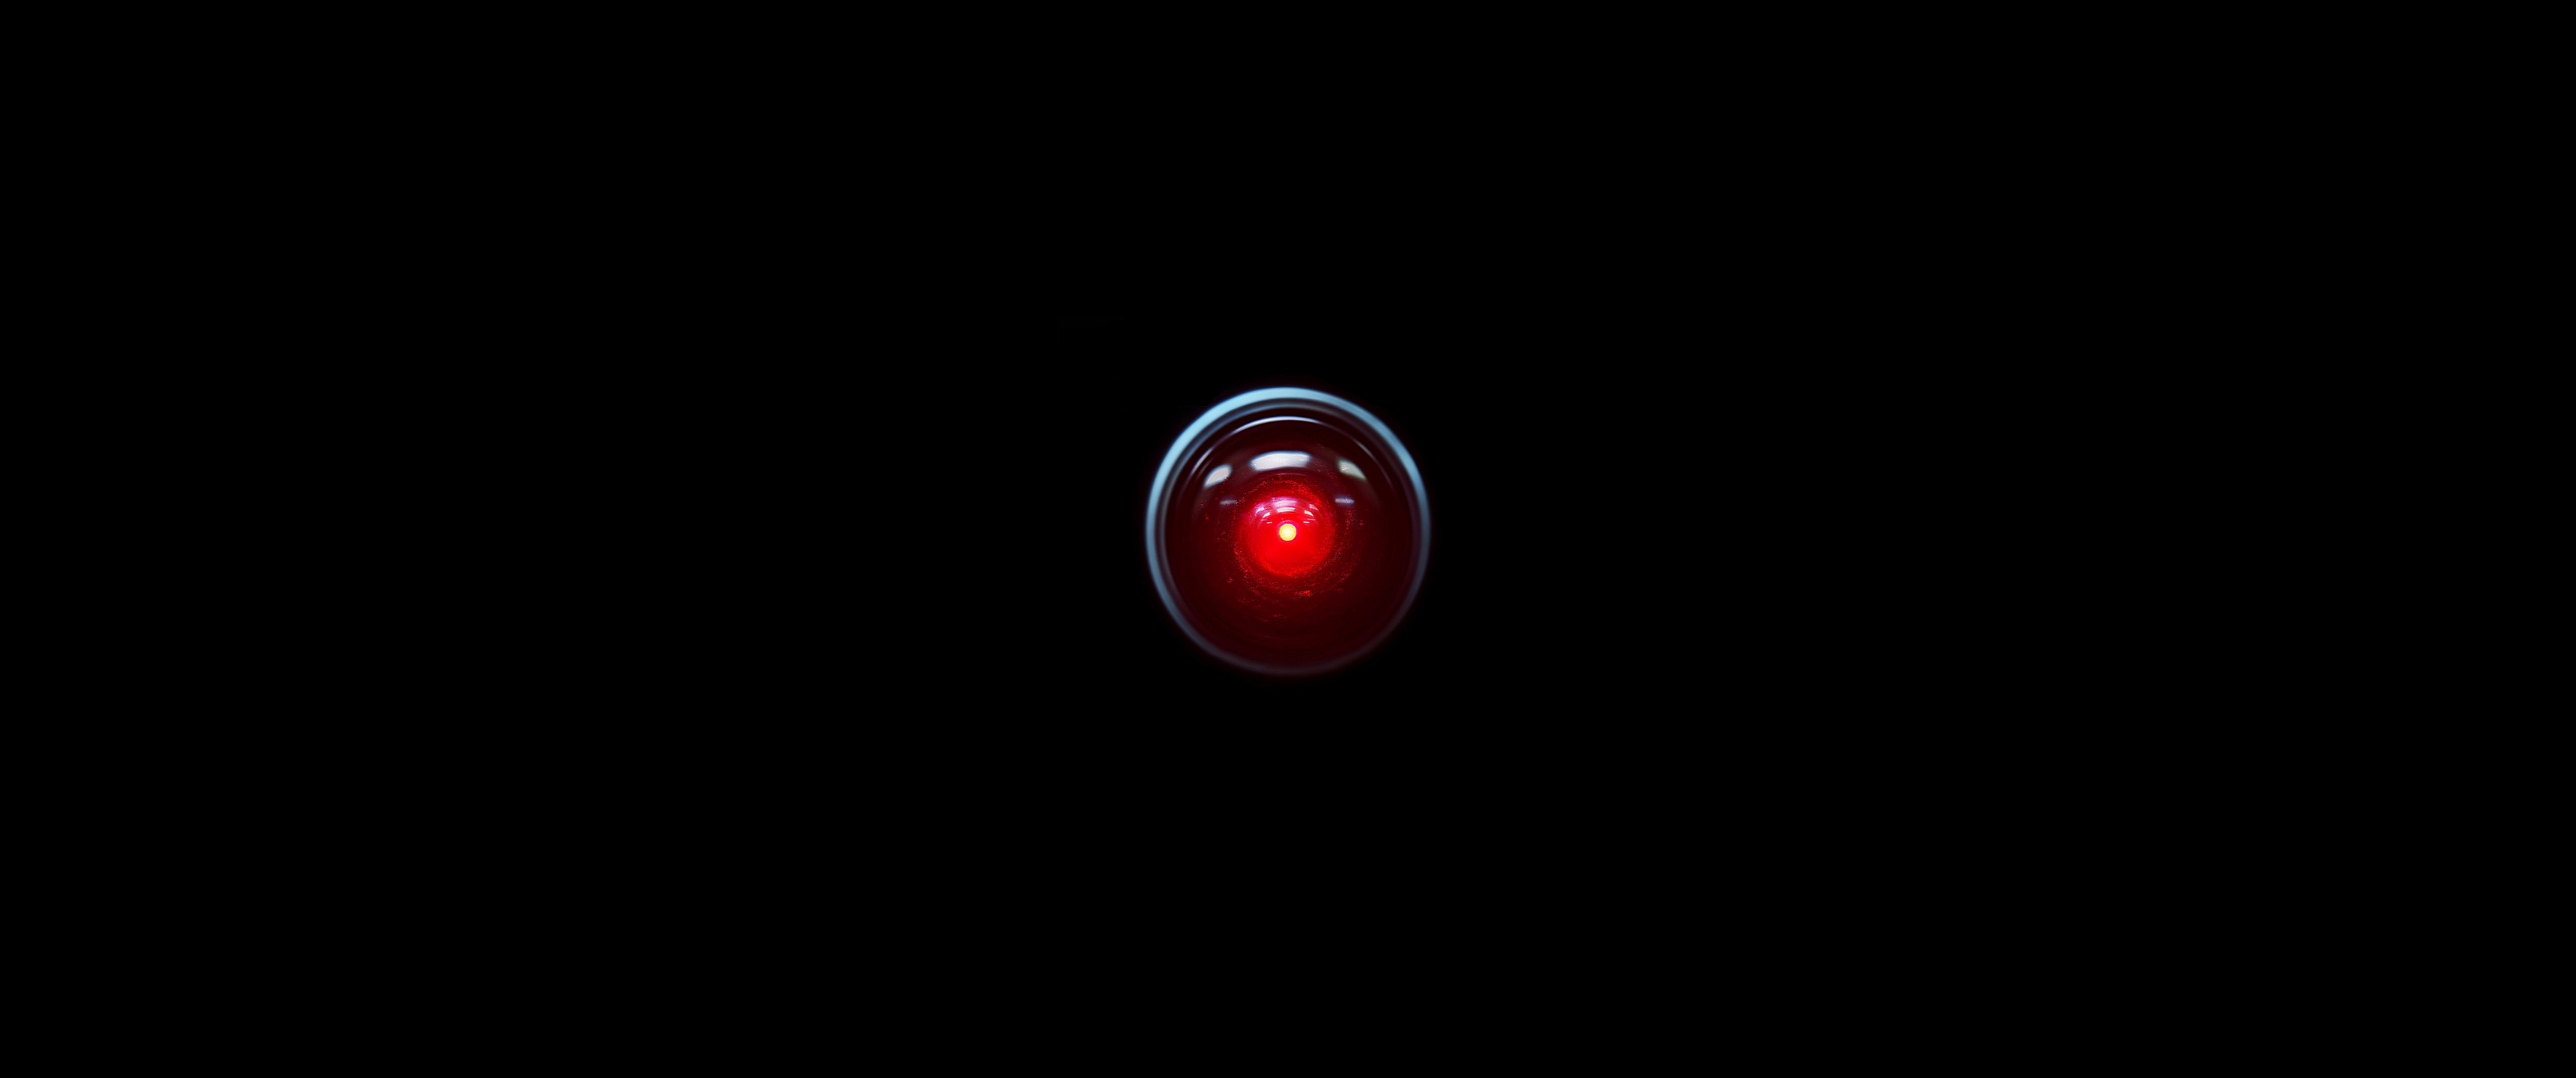 General 3440x1440 computer technology black background HAL 9000 minimalism simple background 2001: A Space Odyssey movie characters